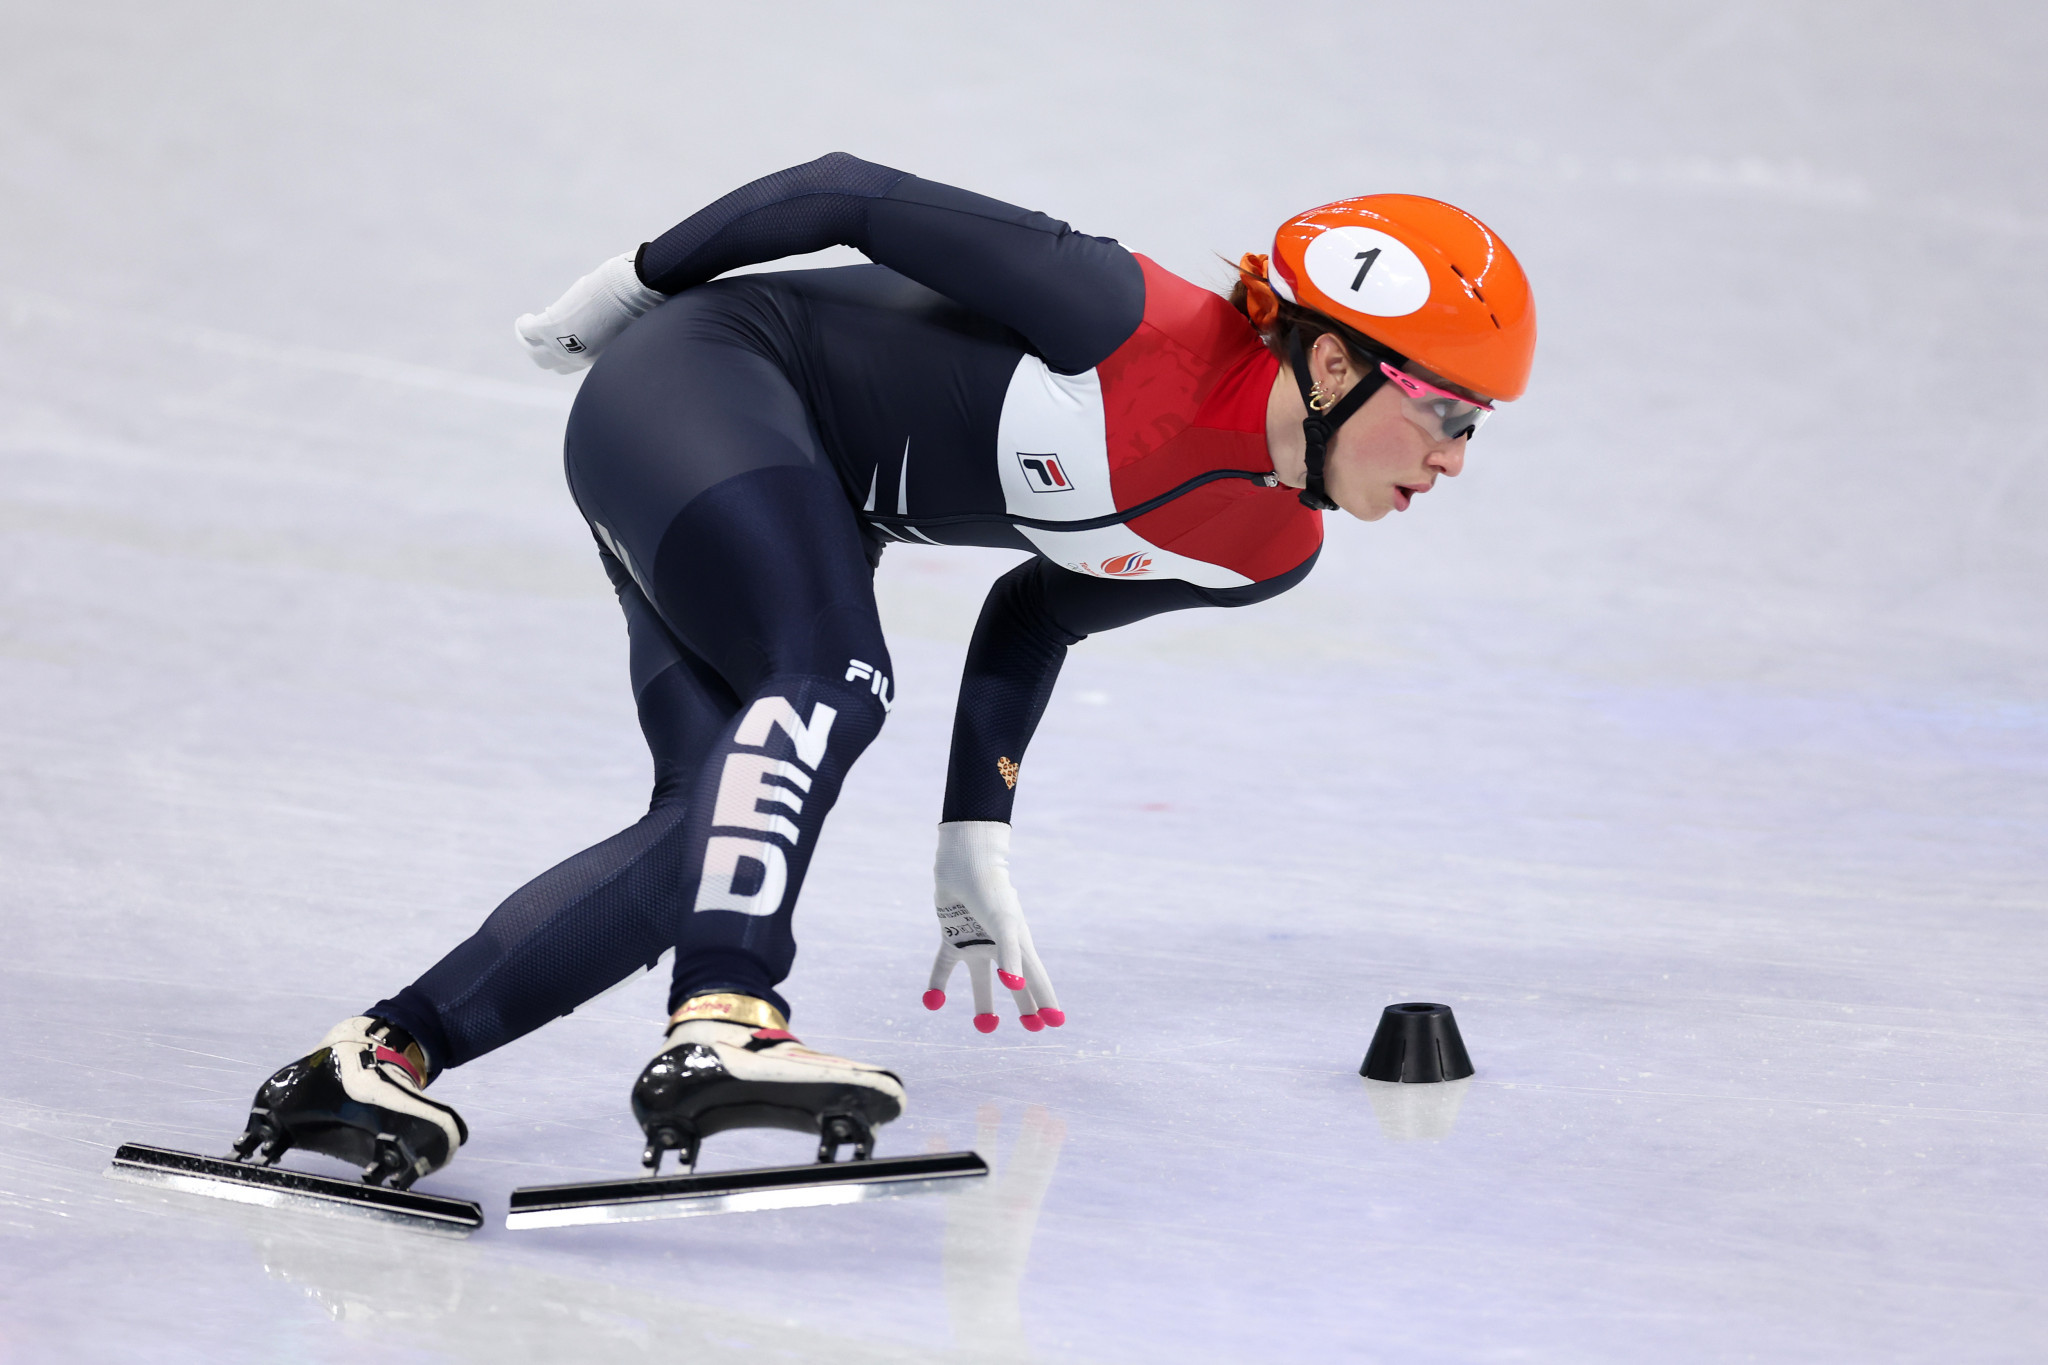 Olympic champions Schulting and Choi earn victories at Short Track Speed Skating World Cup in Dresden